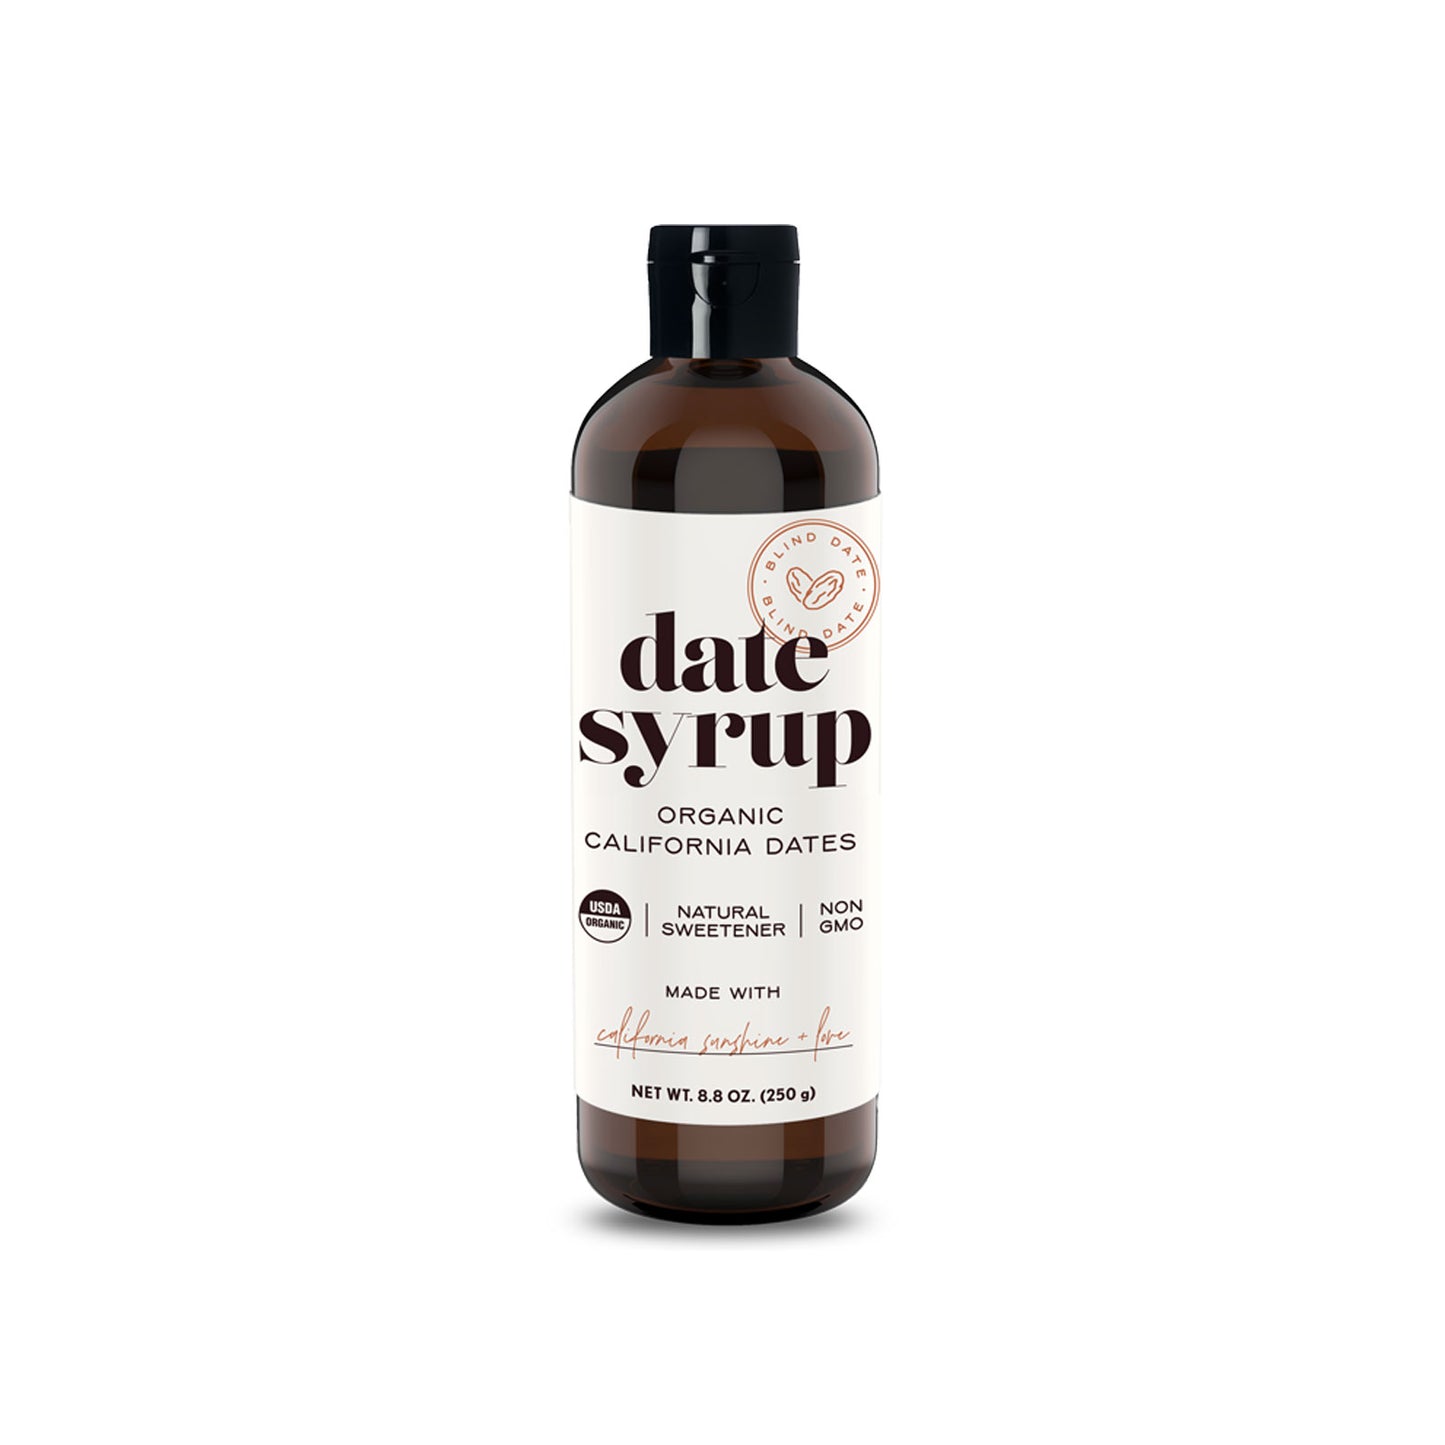 Blind Date Syrup